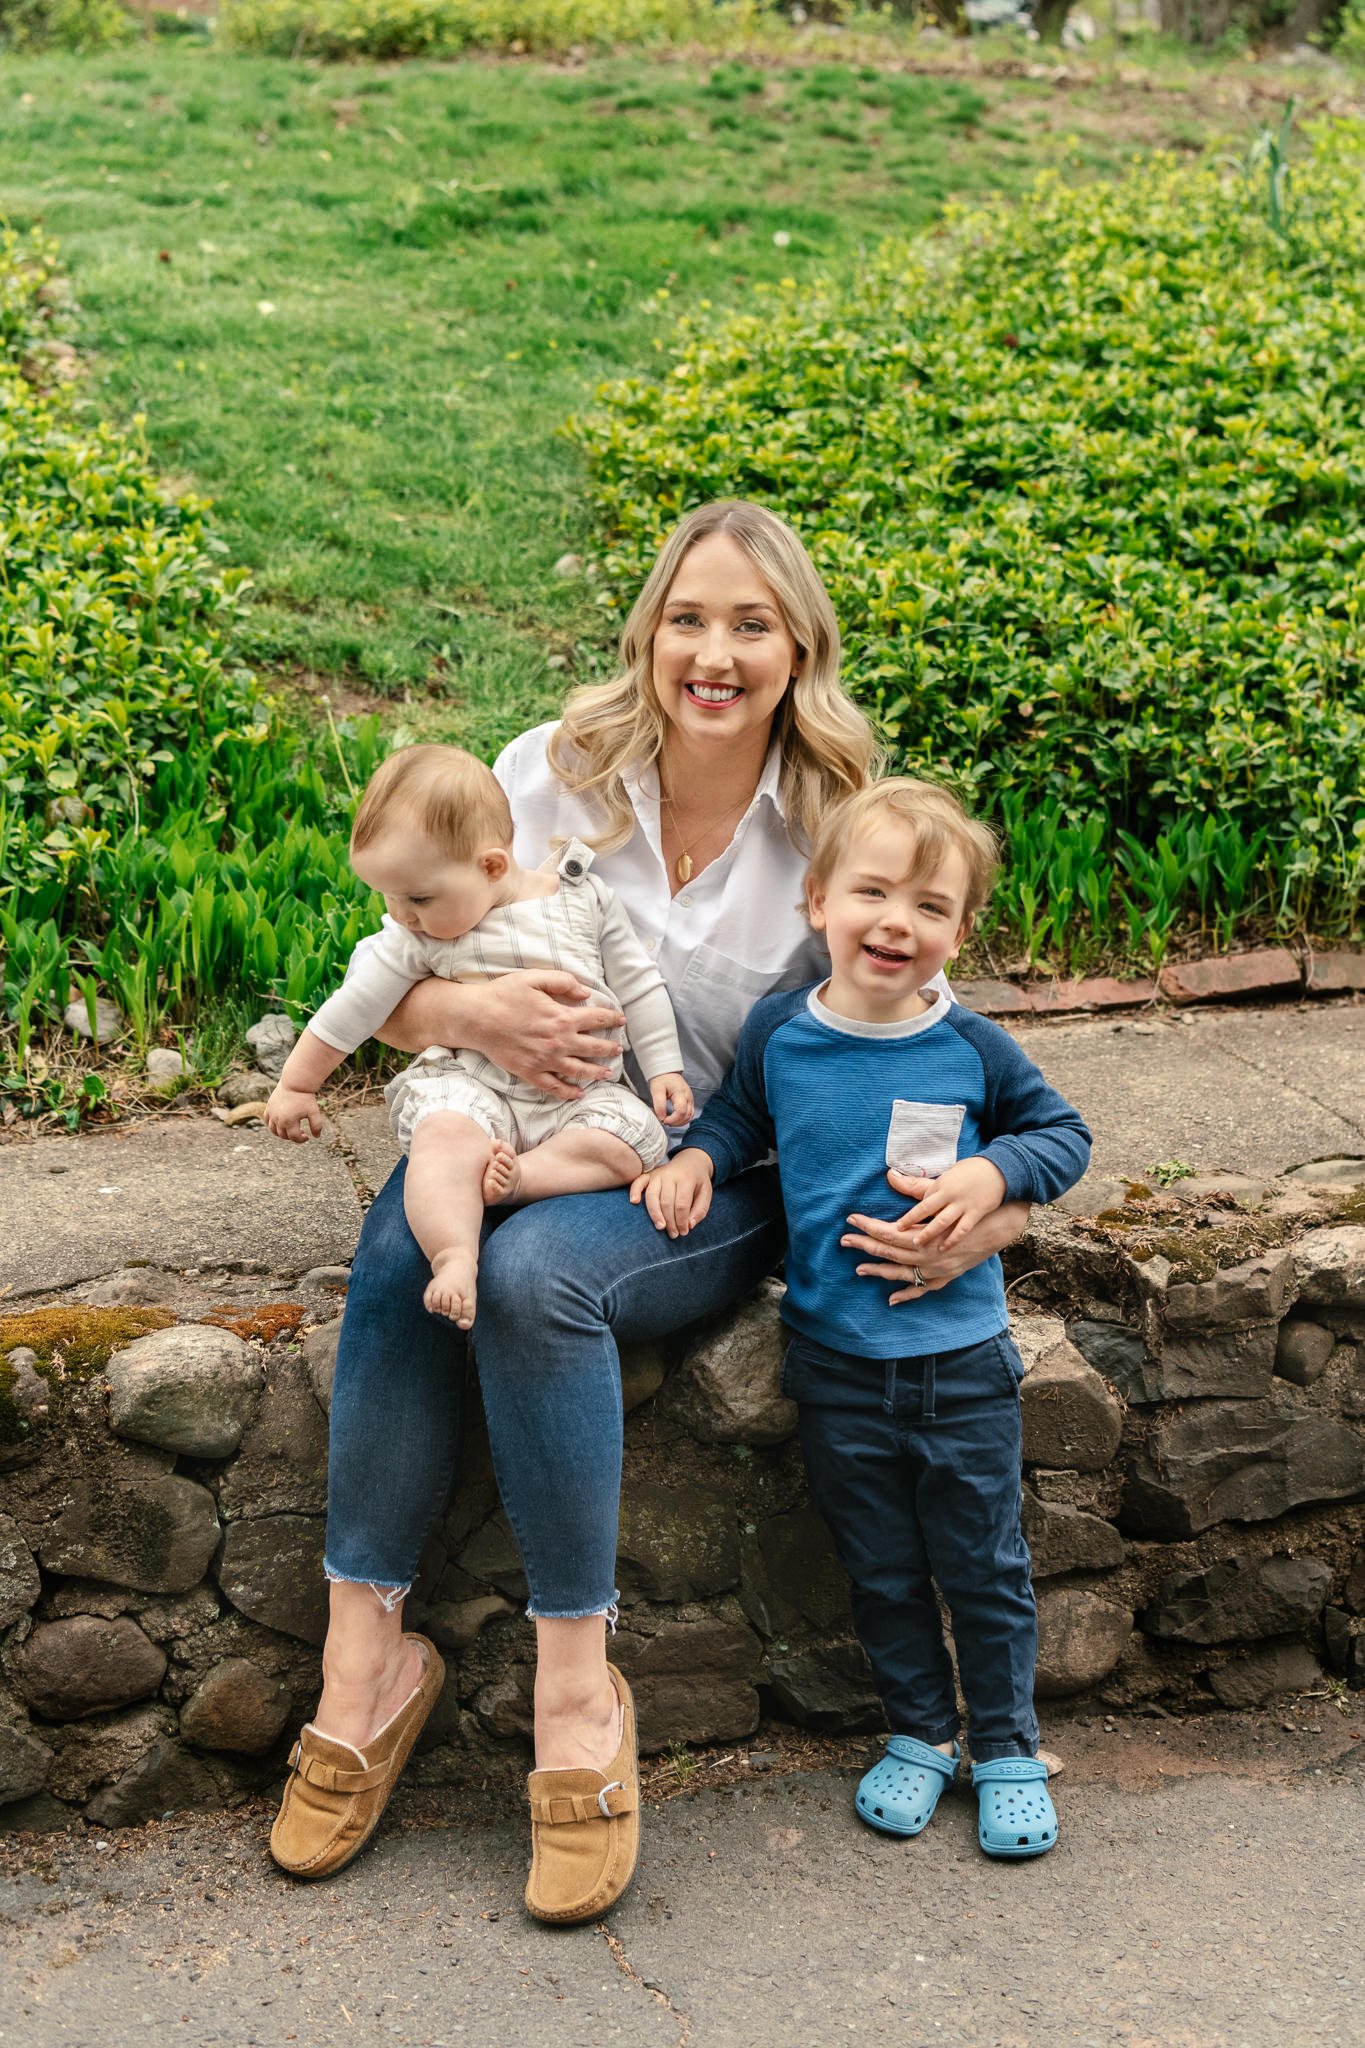  Lifestyle portrait of a mother with her little children playing outside by Nicole Hawkins Photography. mother and children outdoor portraits #NicoleHawkinsPhotography #NicoleHawkinsfamilies #AtHomePortraits #EastCoastFamilyPhotographer #NewJerseyInH